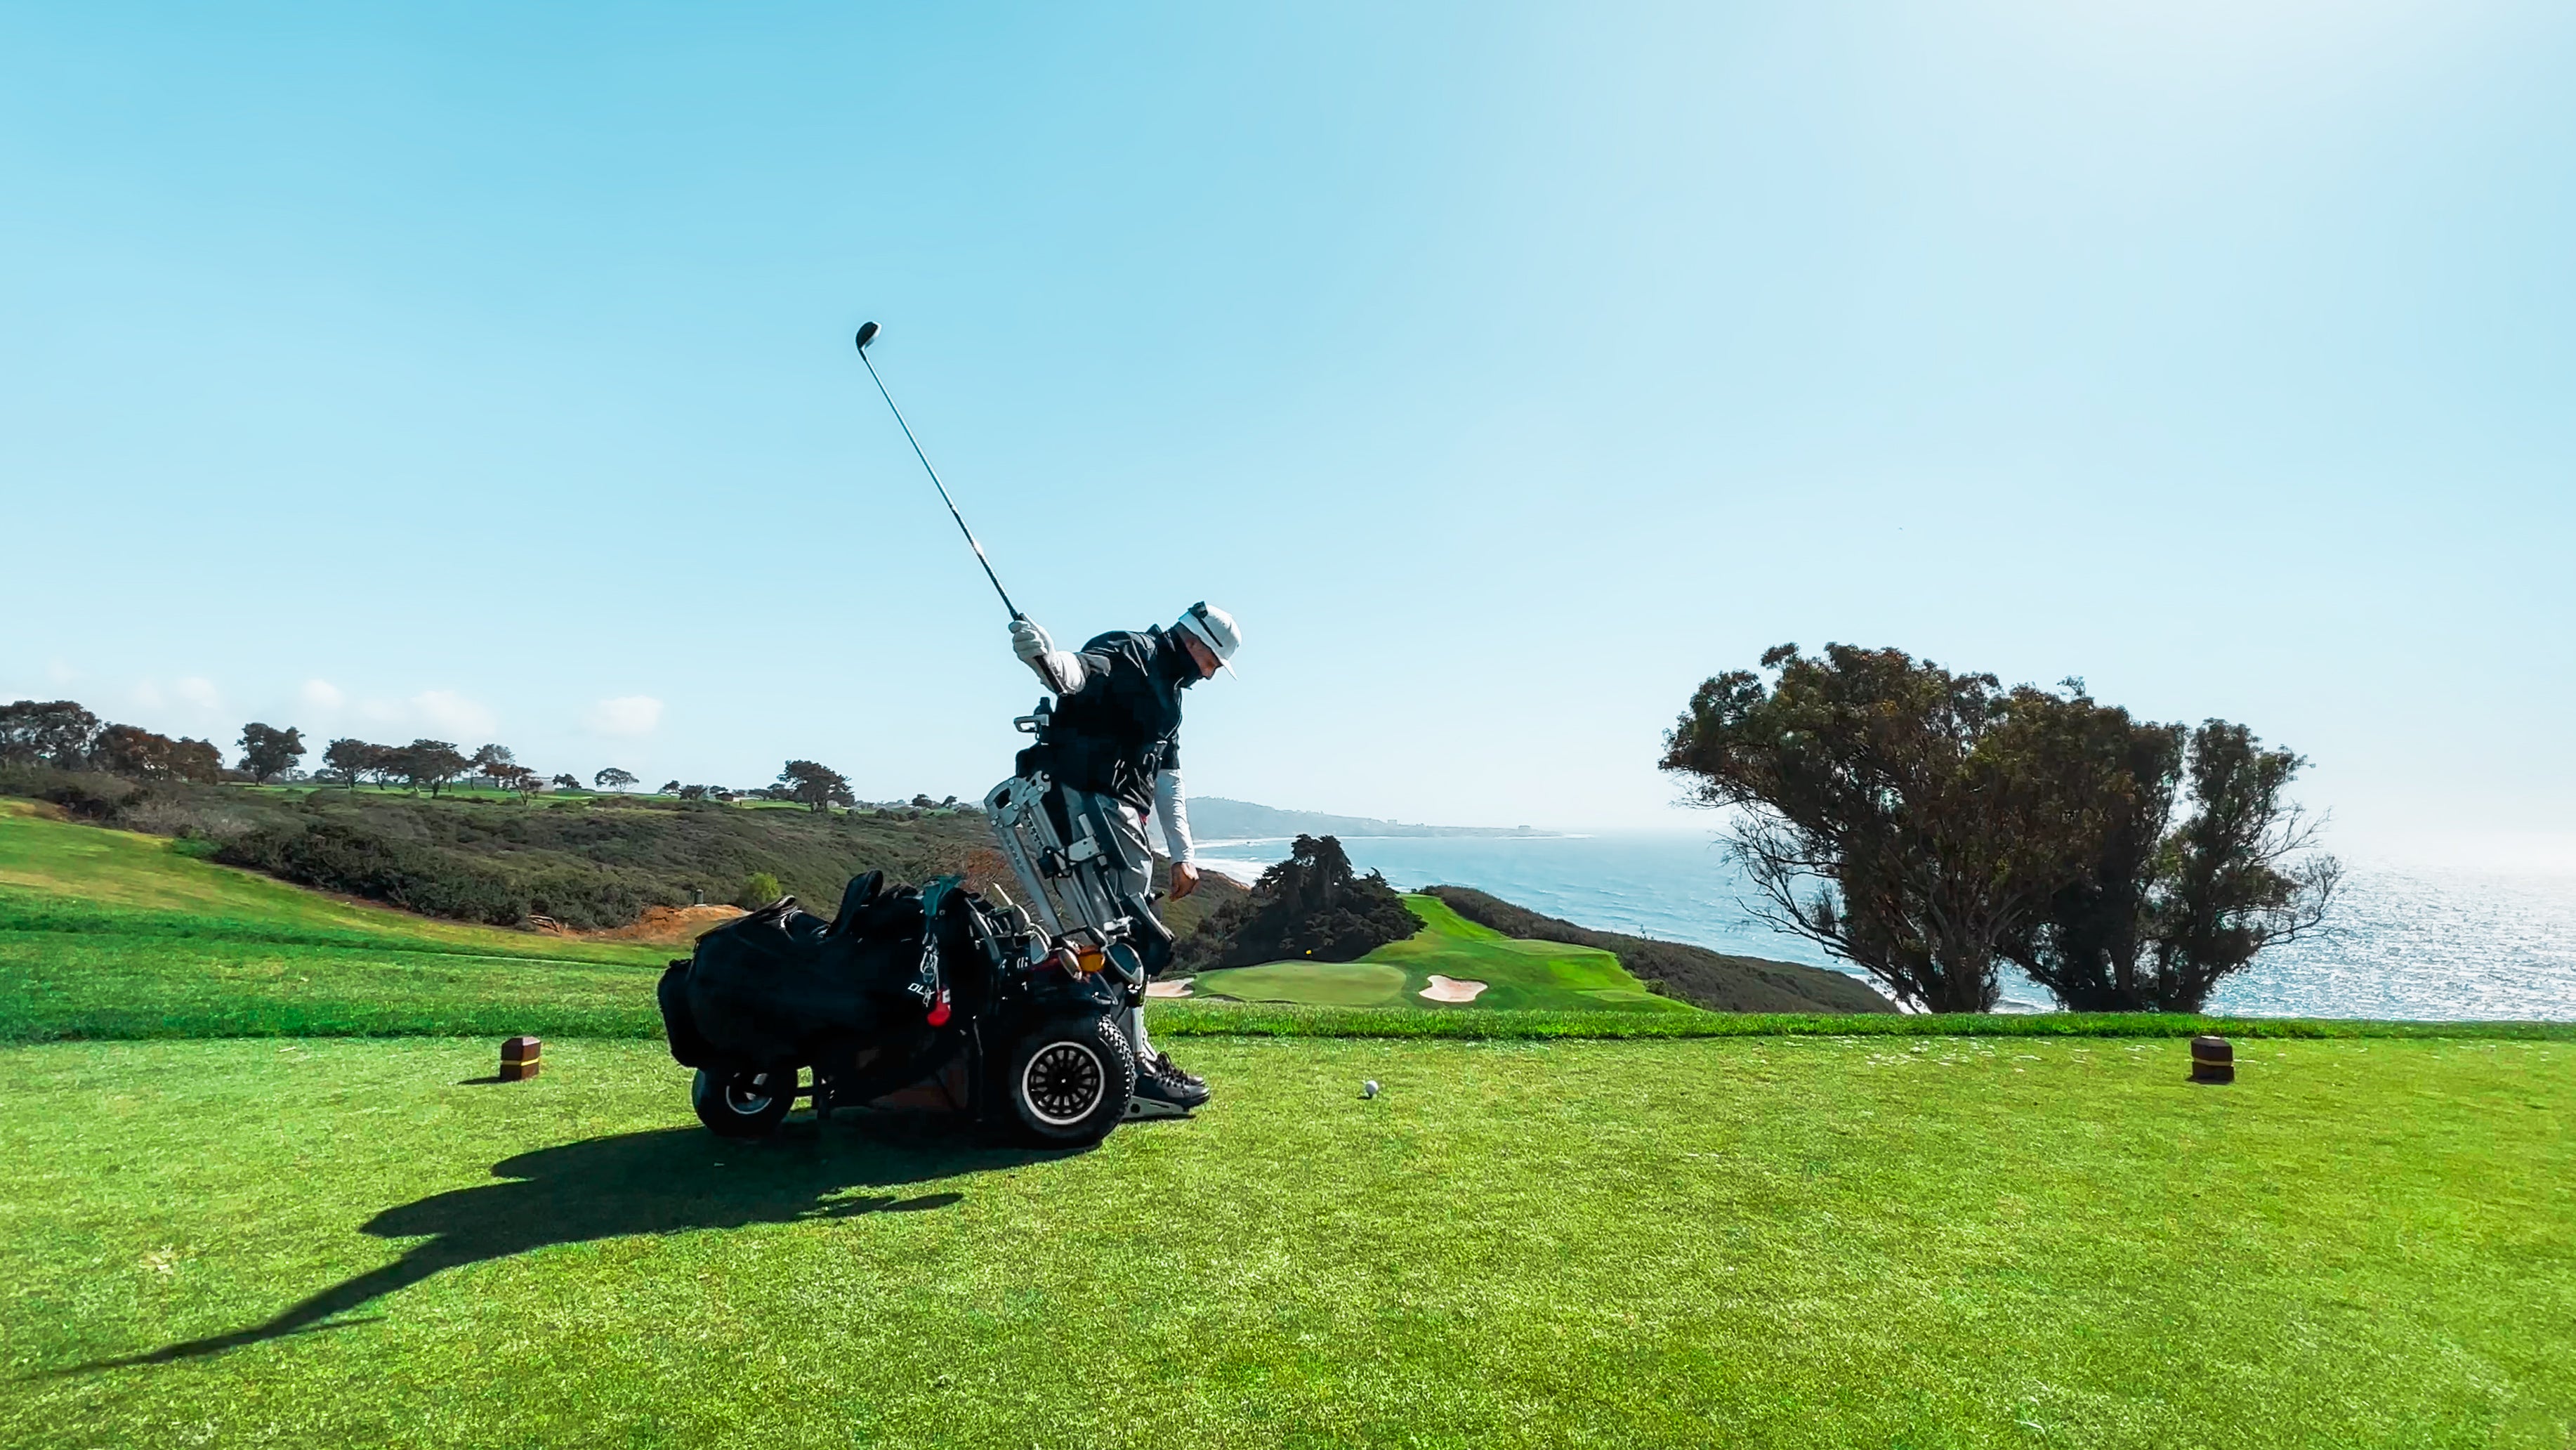 The backswing of Amplife® Foundation & Amplife® Founder Abdul Nevarez's 2nd one-armed hole-in-one as a right above knee amputee with severe nerve damage in his left arm and left leg in an adaptive golf cart at Torrey Pines North Course 15th